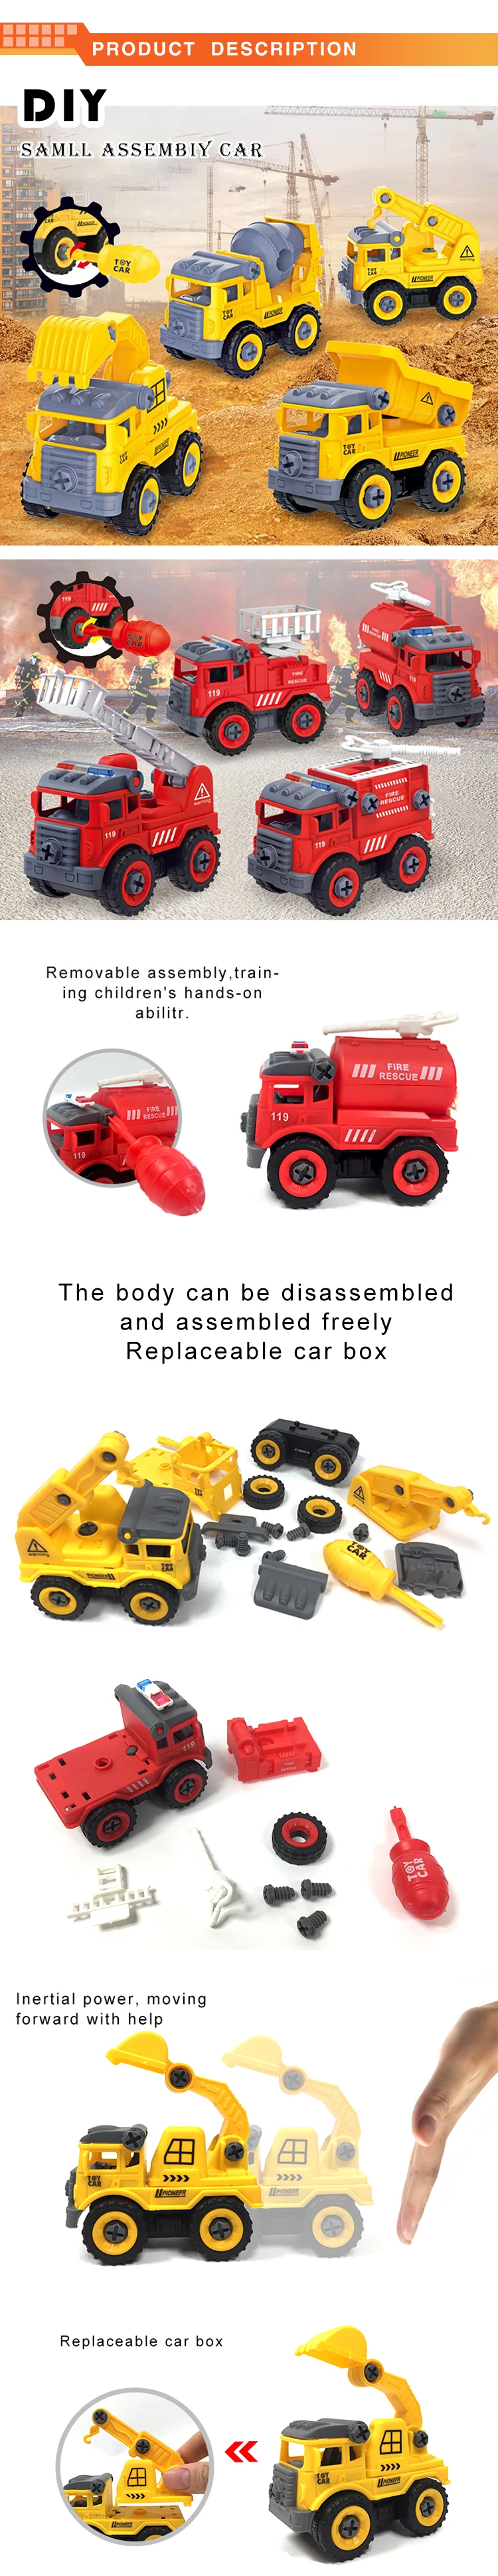 Amazon hot sale educational toy 4 pcs assembly car mini fire truck toy